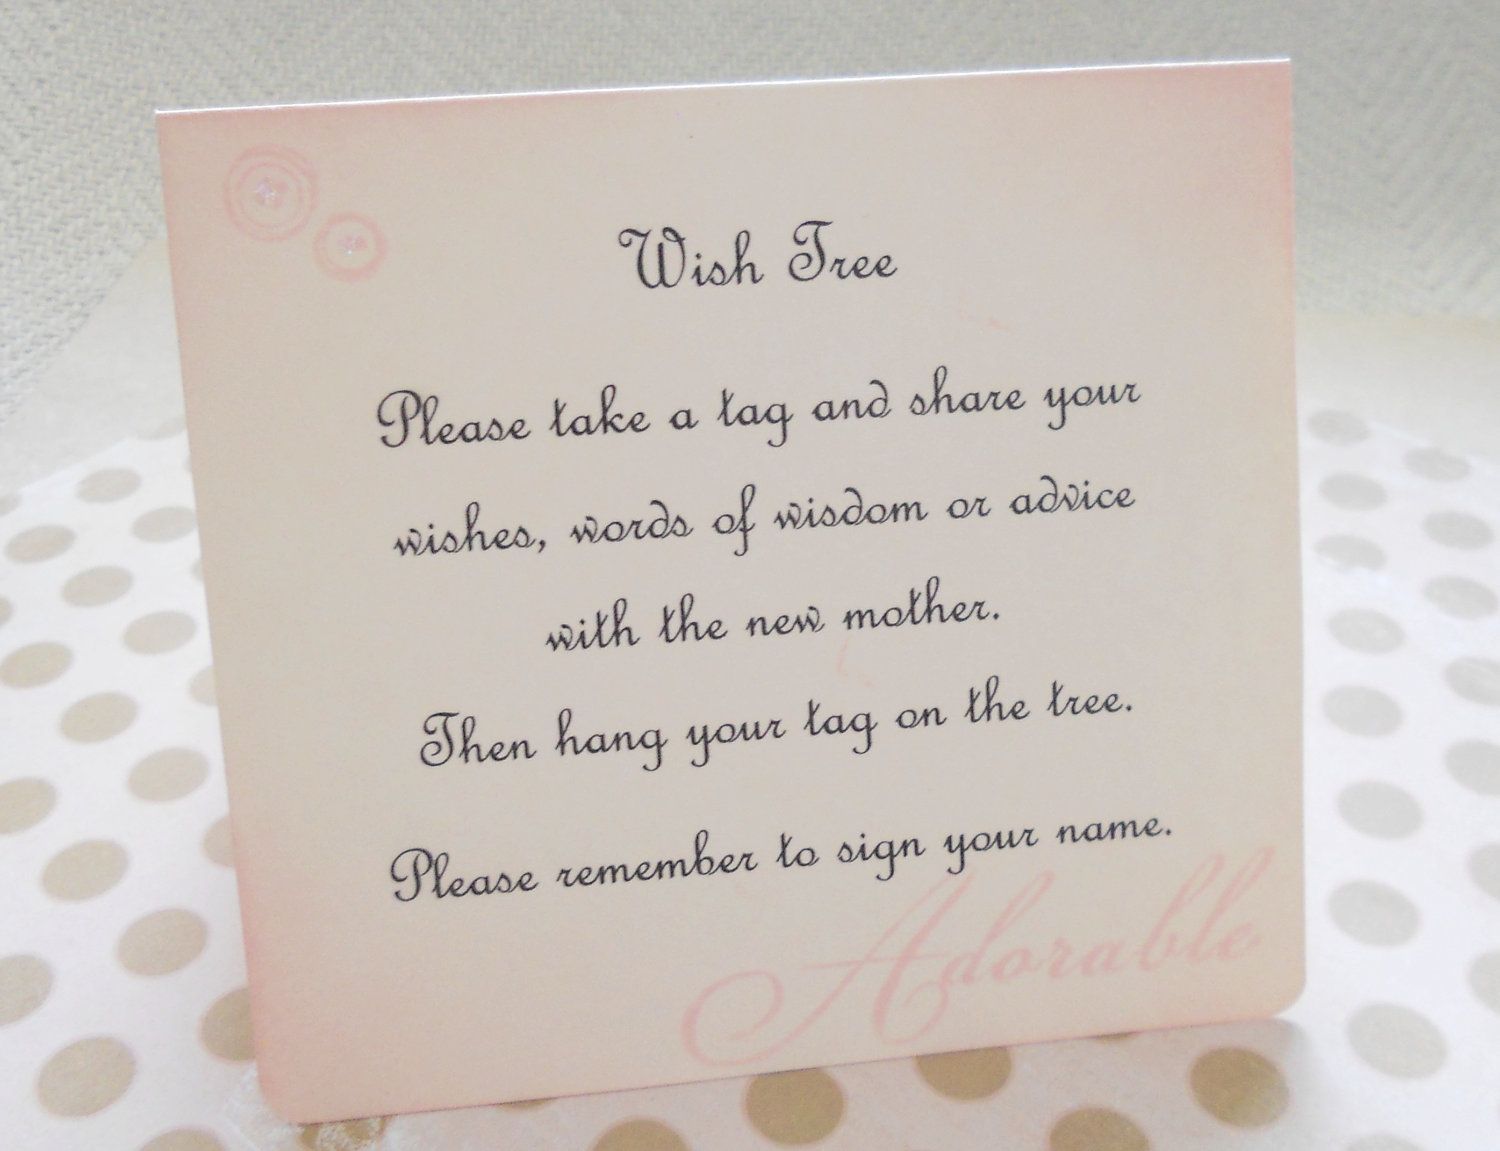 Full Size of Baby Shower:stylish Baby Shower Wishes Picture Inspirations Baby Shower Wishes Coed Baby Shower Baby Shower Ideas For Boys Baby Shower Gift List Princess Baby Shower Personalized Baby Shower Wish Card Instruction Sign Baby Shower Wish Tree Instructions